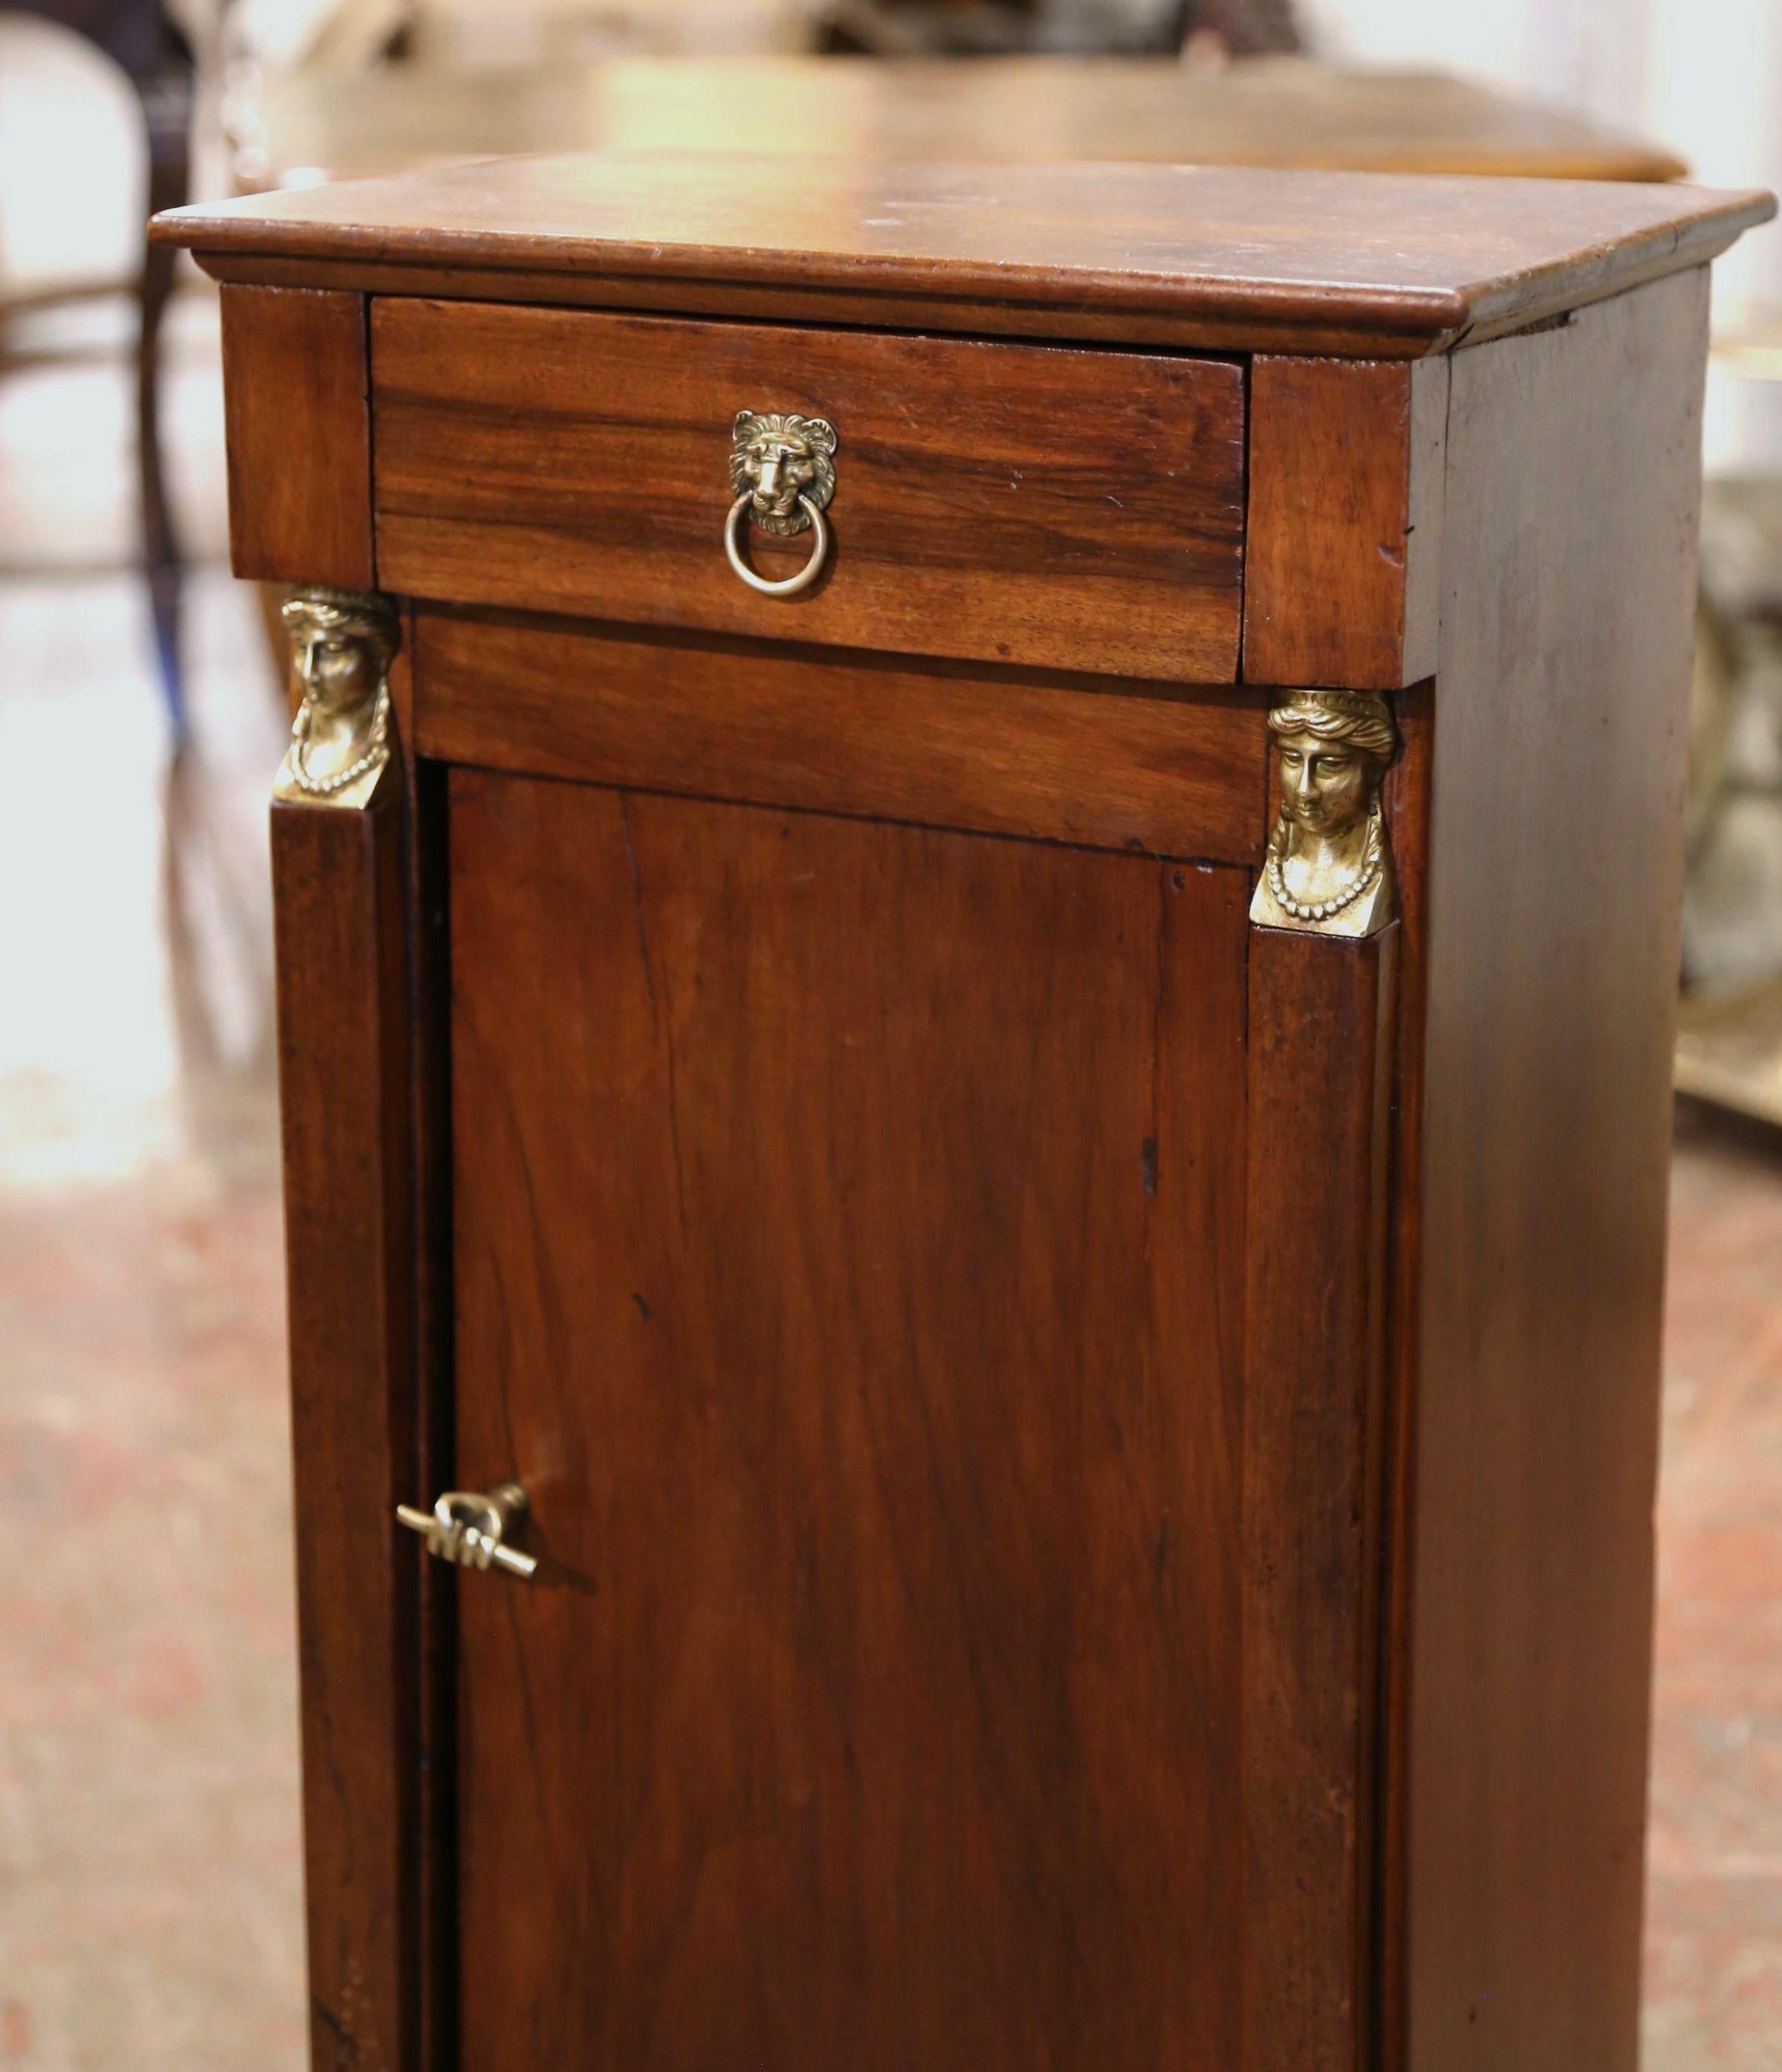 Crafted in France, circa 1880, the elegant antique cabinet is decorated with front square columns embellished with decorative brass mounts at the shoulder and the base, and ending with bracket feet over a wide bottom plinth. The small fruit wood